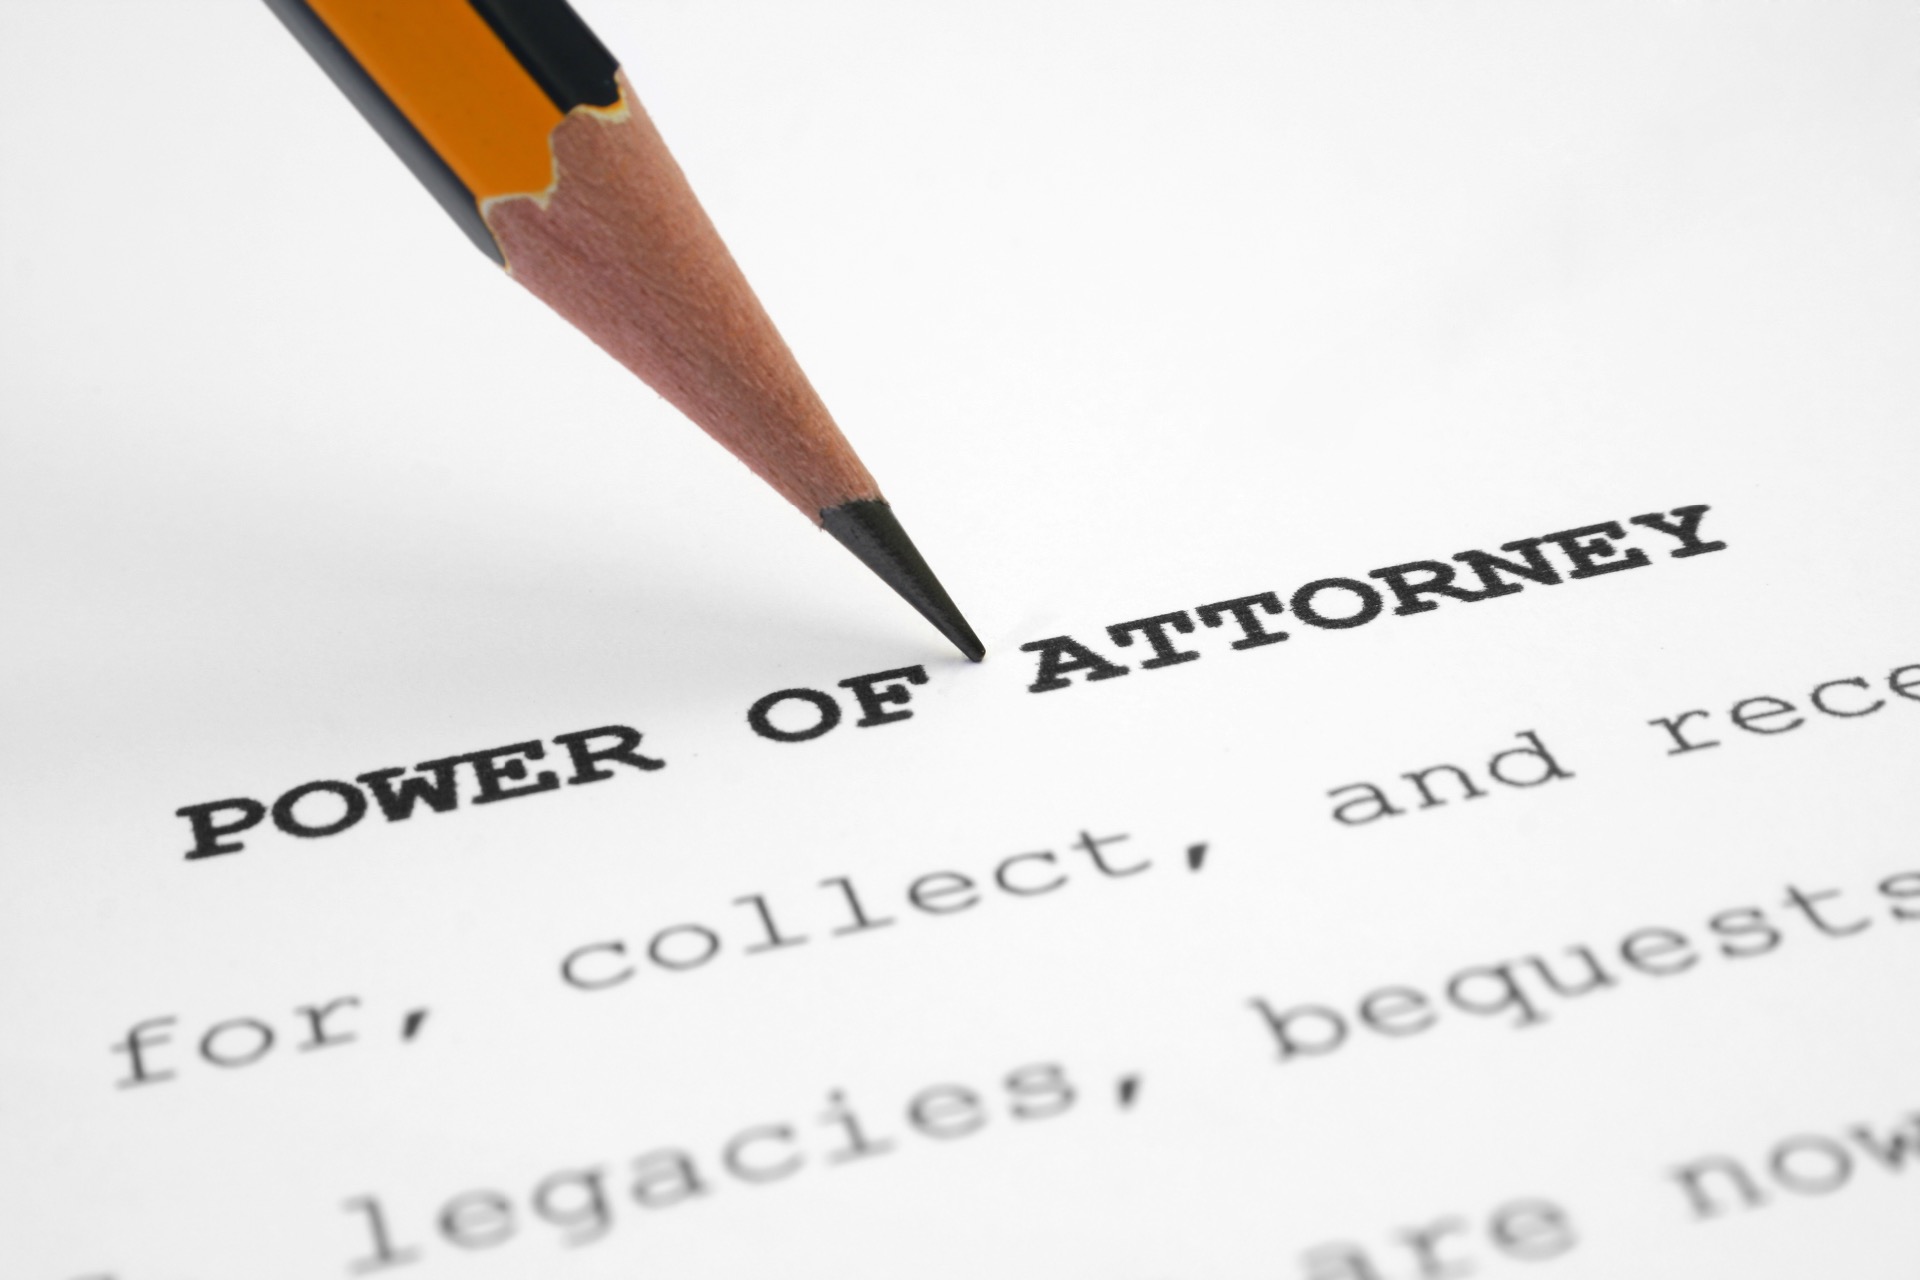 Power of Attorney - our Solicitors in Lytham can assist with setting up Lasting Powers of Attorney, to help set up your future.  Call 01253 202 452.